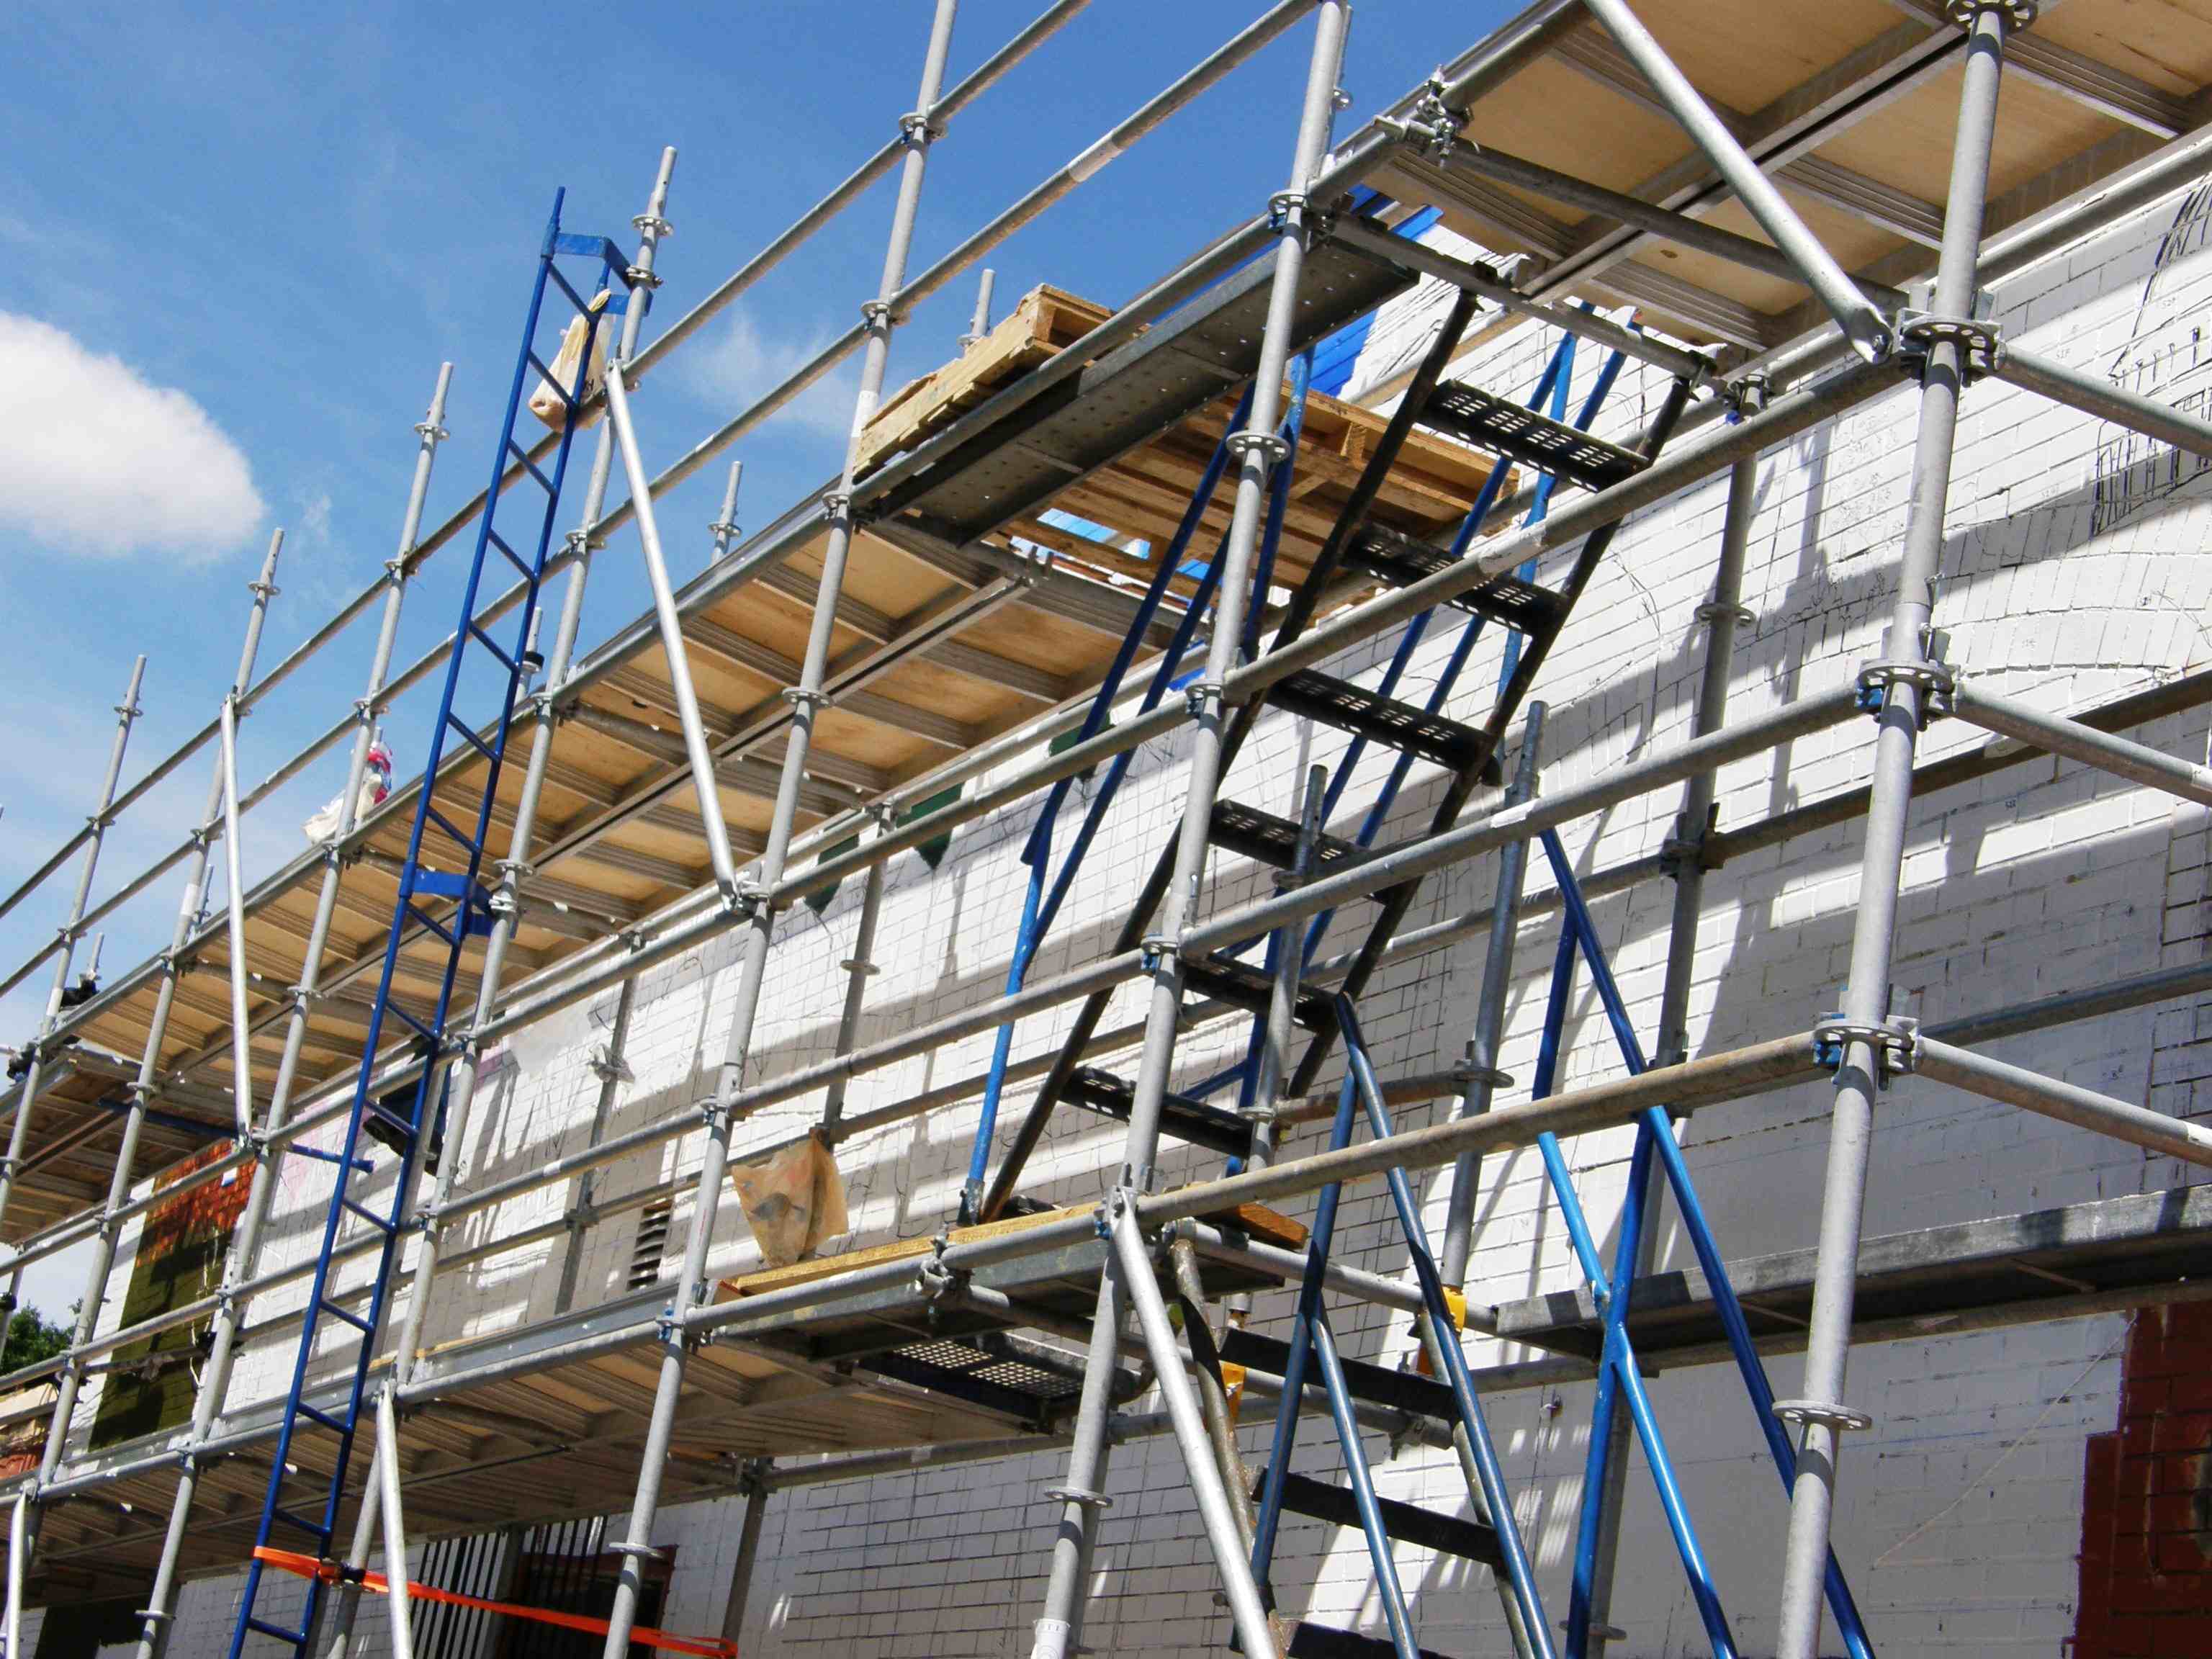 Scaffolding, construction sheds, and temporary roofs must be properly secured to resist high winds.